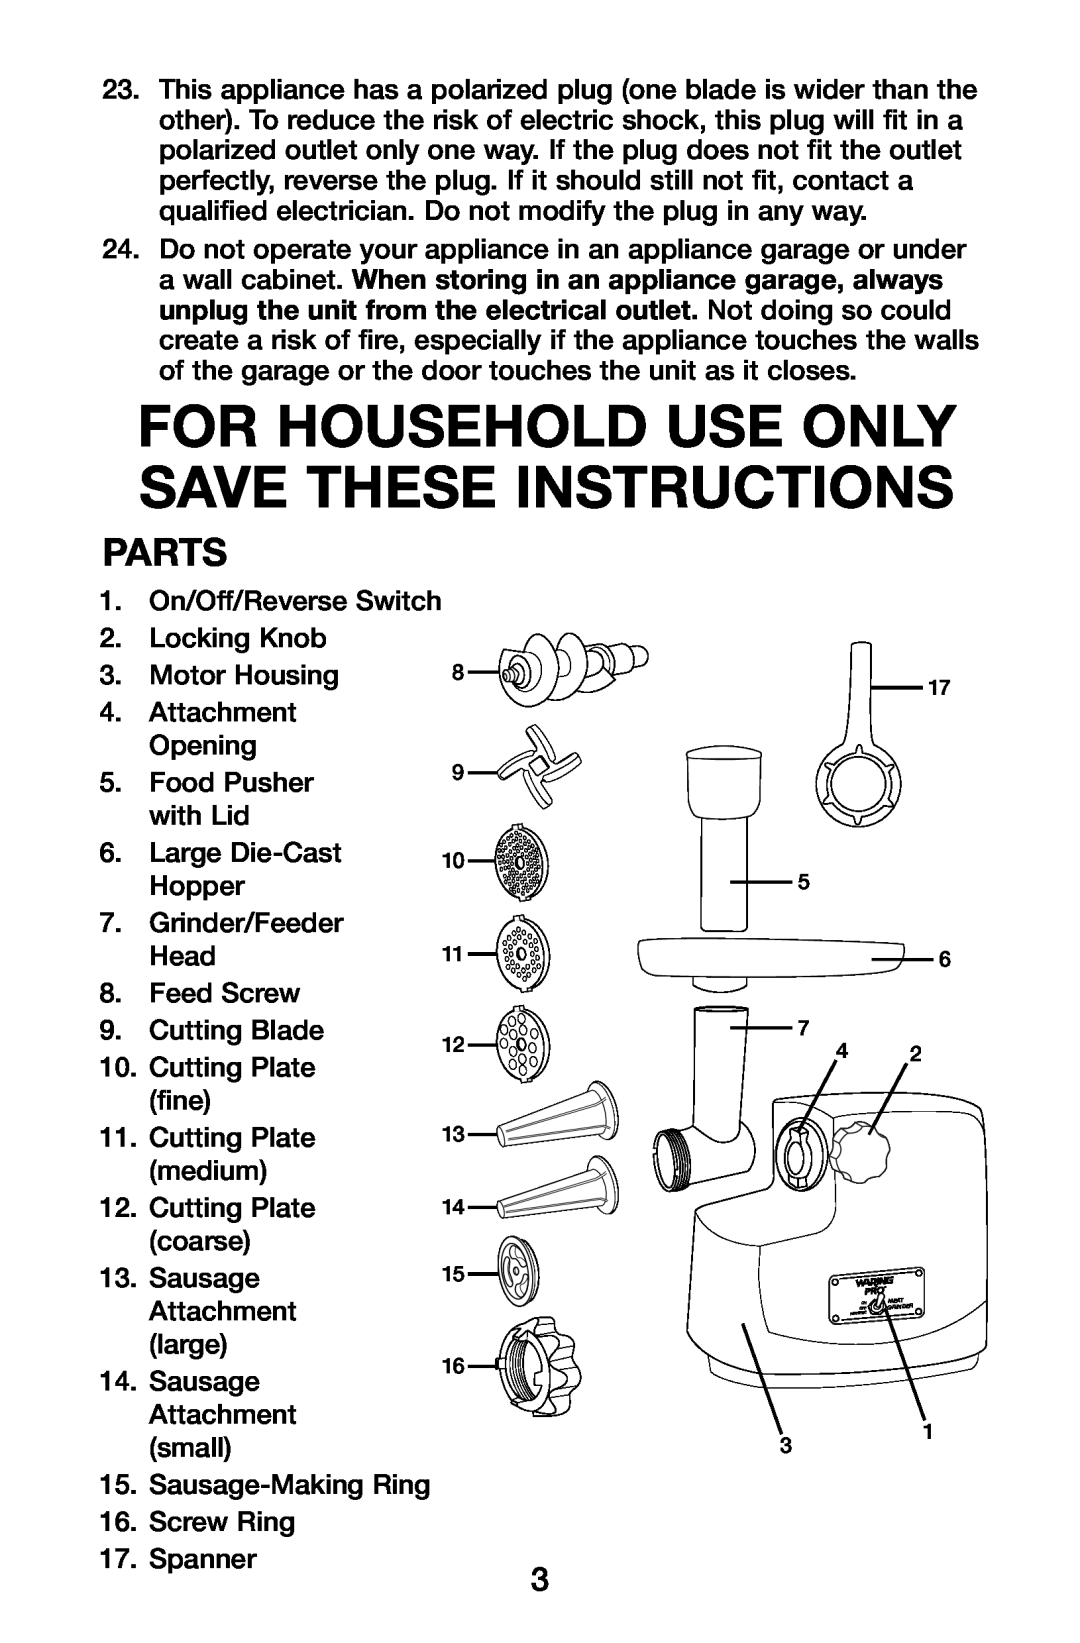 Waring MG855 manual For Household Use Only Save These Instructions, Parts 